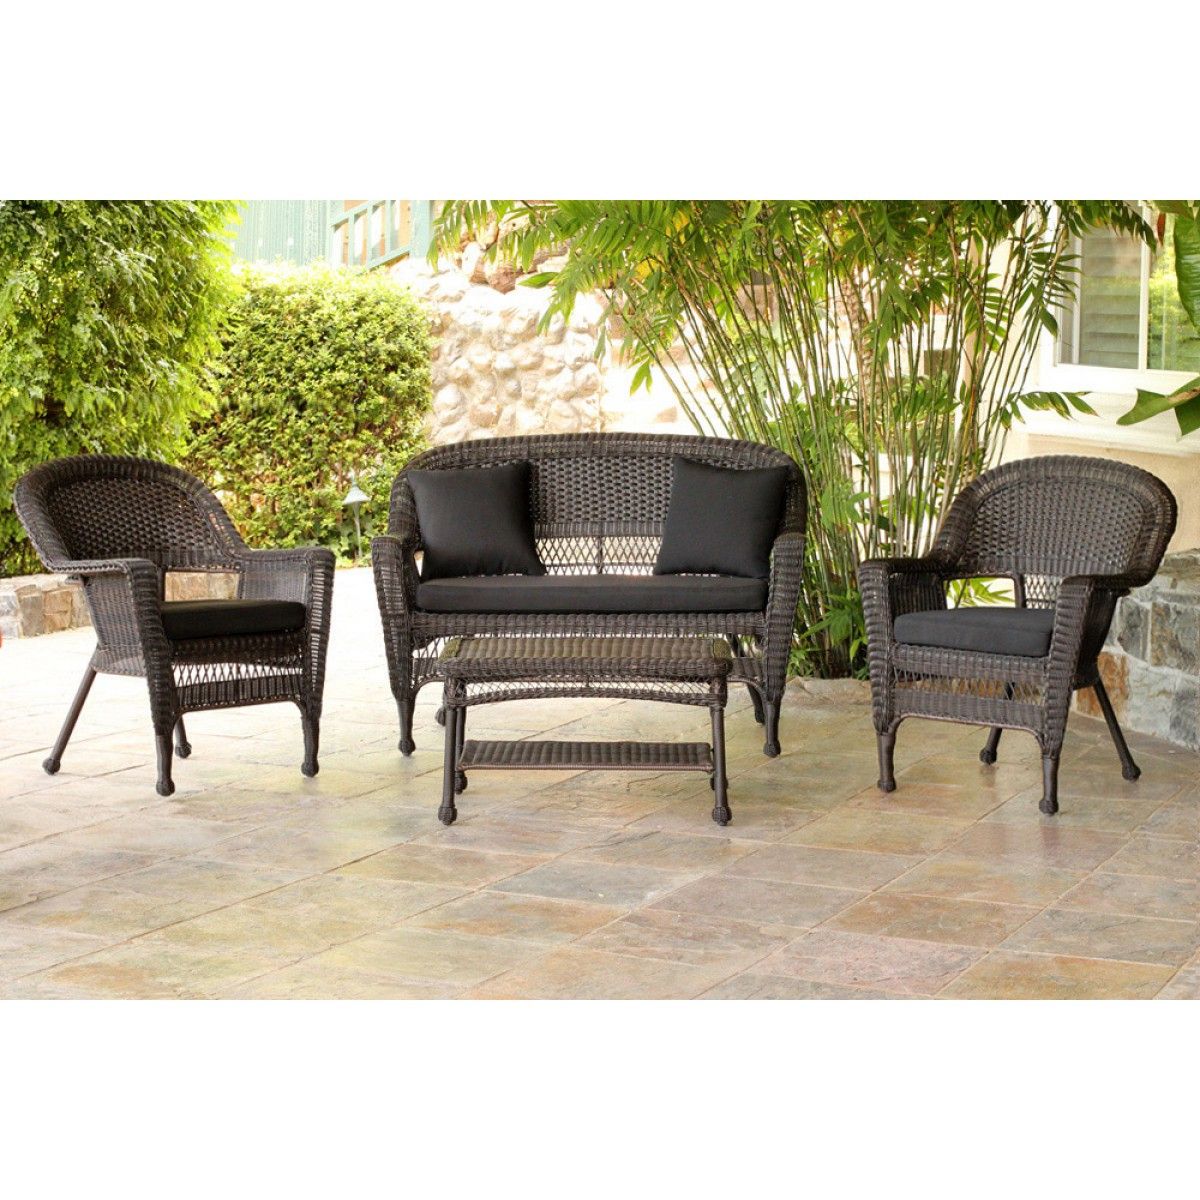 Black Cushion Patio Conversation Sets With Favorite 4pc Espresso Wicker Conversation Set – Black Cushions (View 1 of 15)